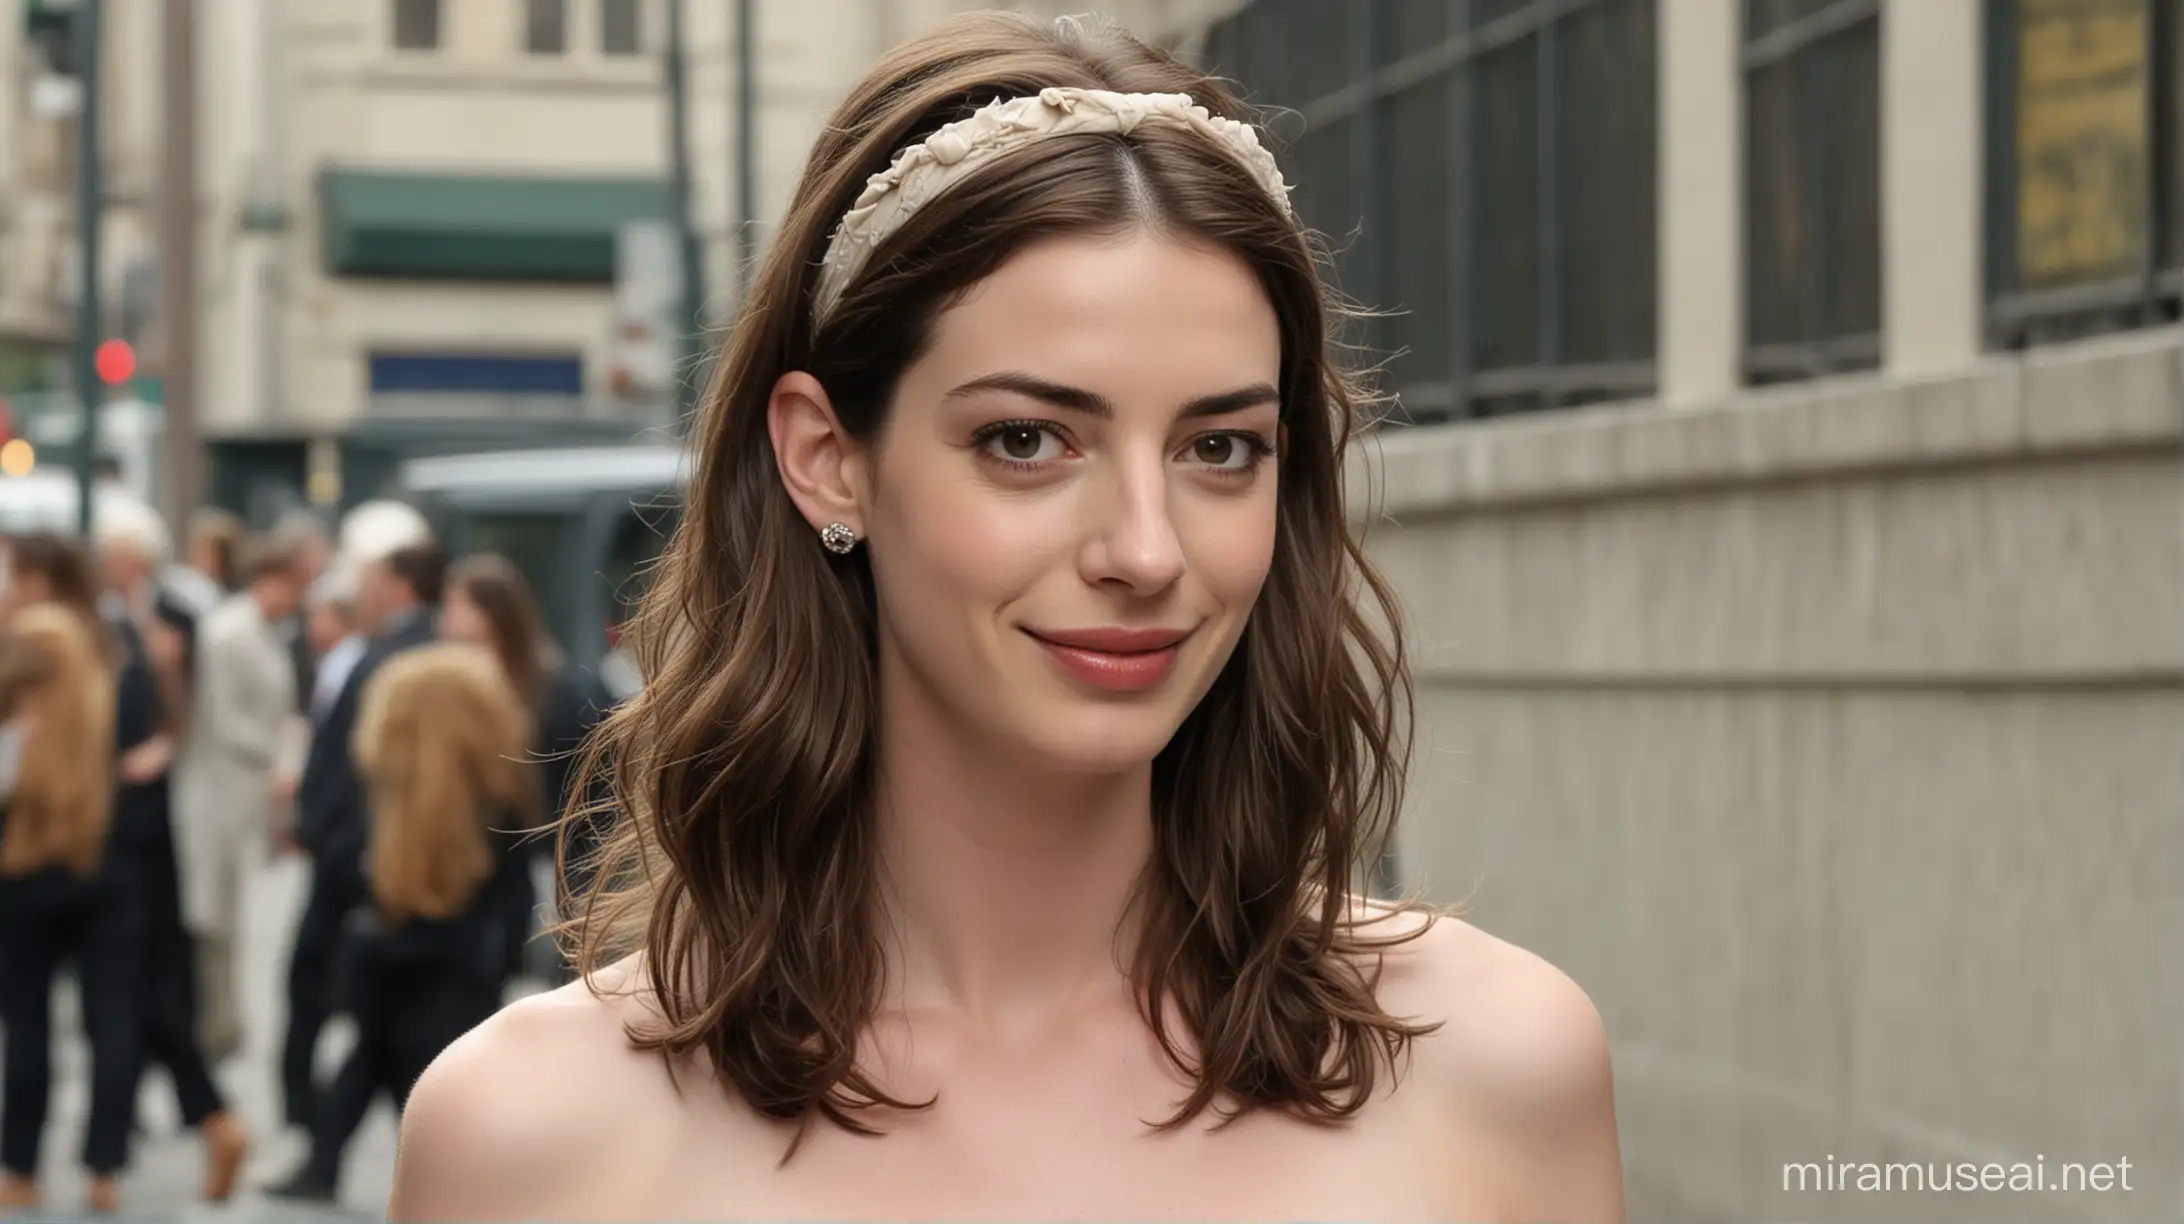 Young Anne Hathaway with Long Wavy Hair and Hairband in Public